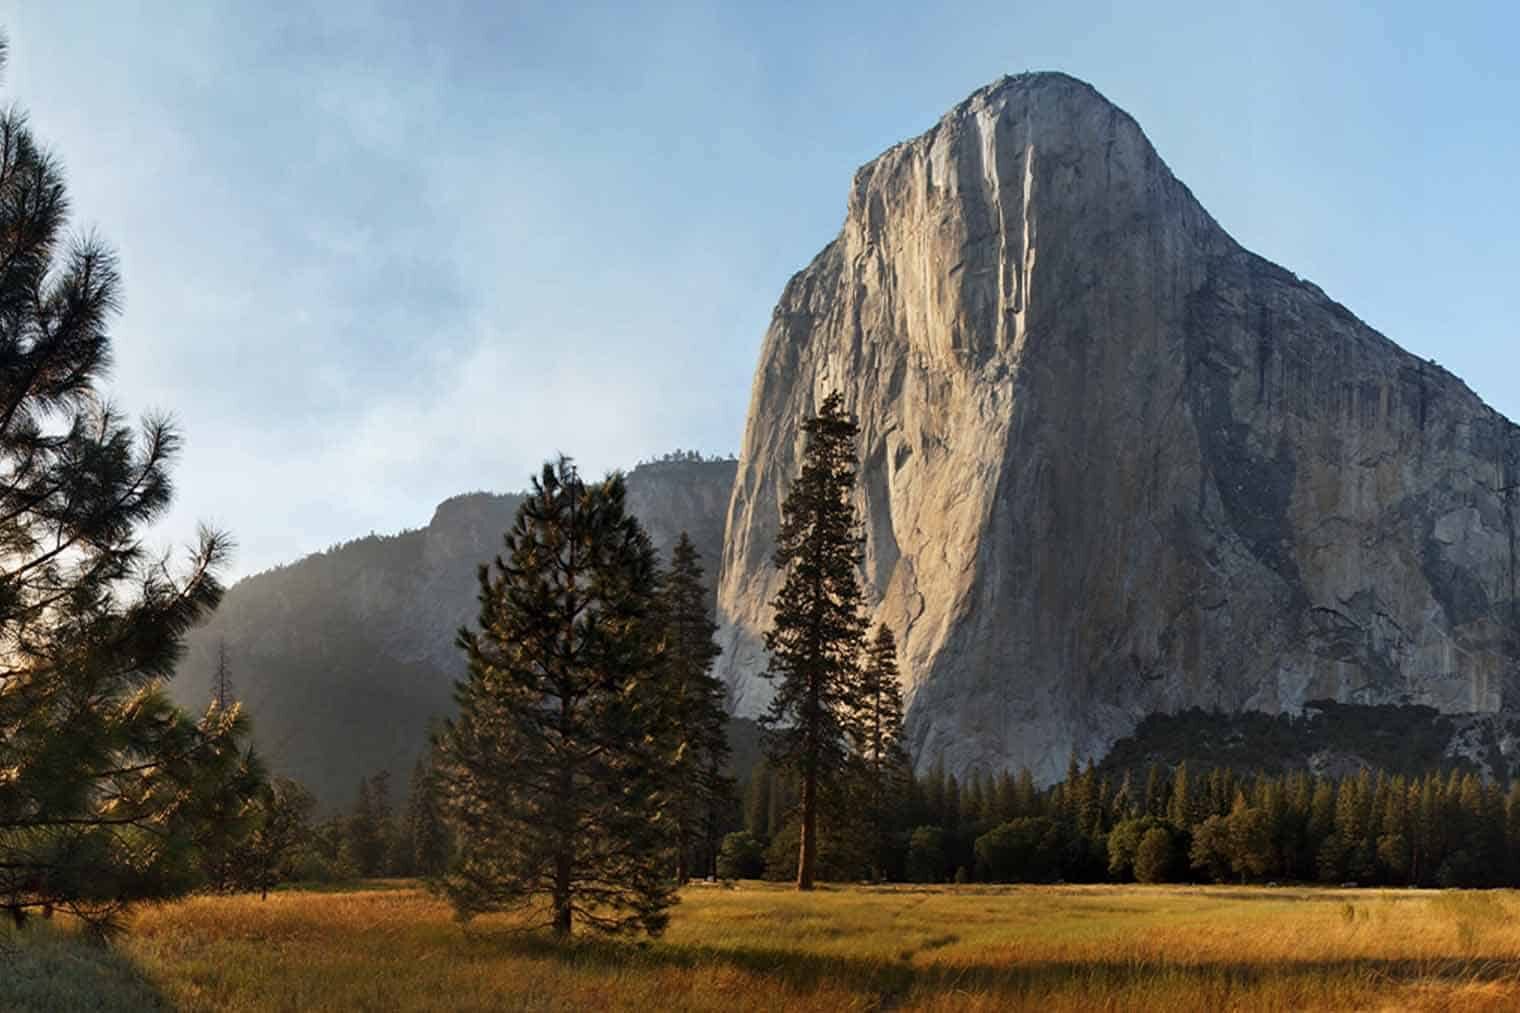 The majestic El Capitan Meadow in Yosemite, with the iconic sheer face of El Capitan rising in the background, a clear blue sky above, and a peaceful meadow with a footbridge and visitors enjoying the idyllic outdoor setting